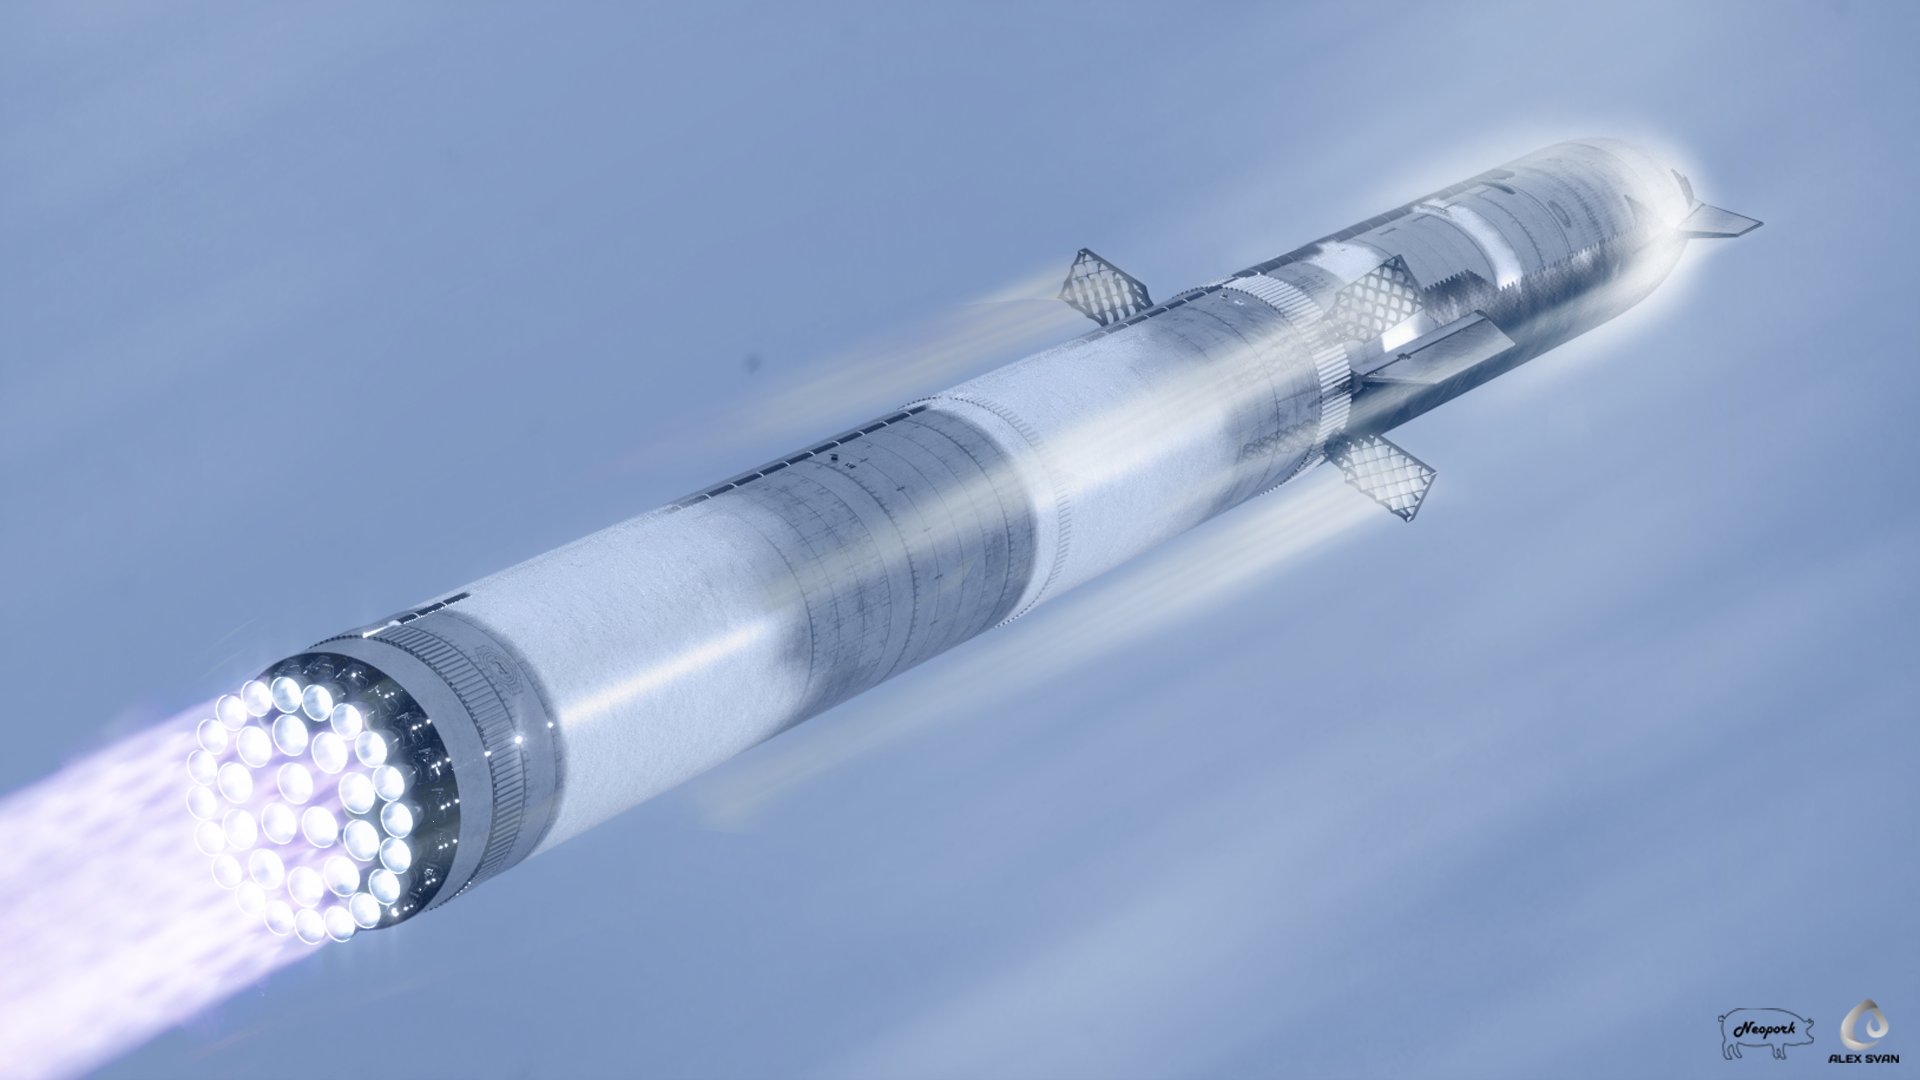 SpaceX assembling superheavy test rocket in Texas Now Official Starship ...